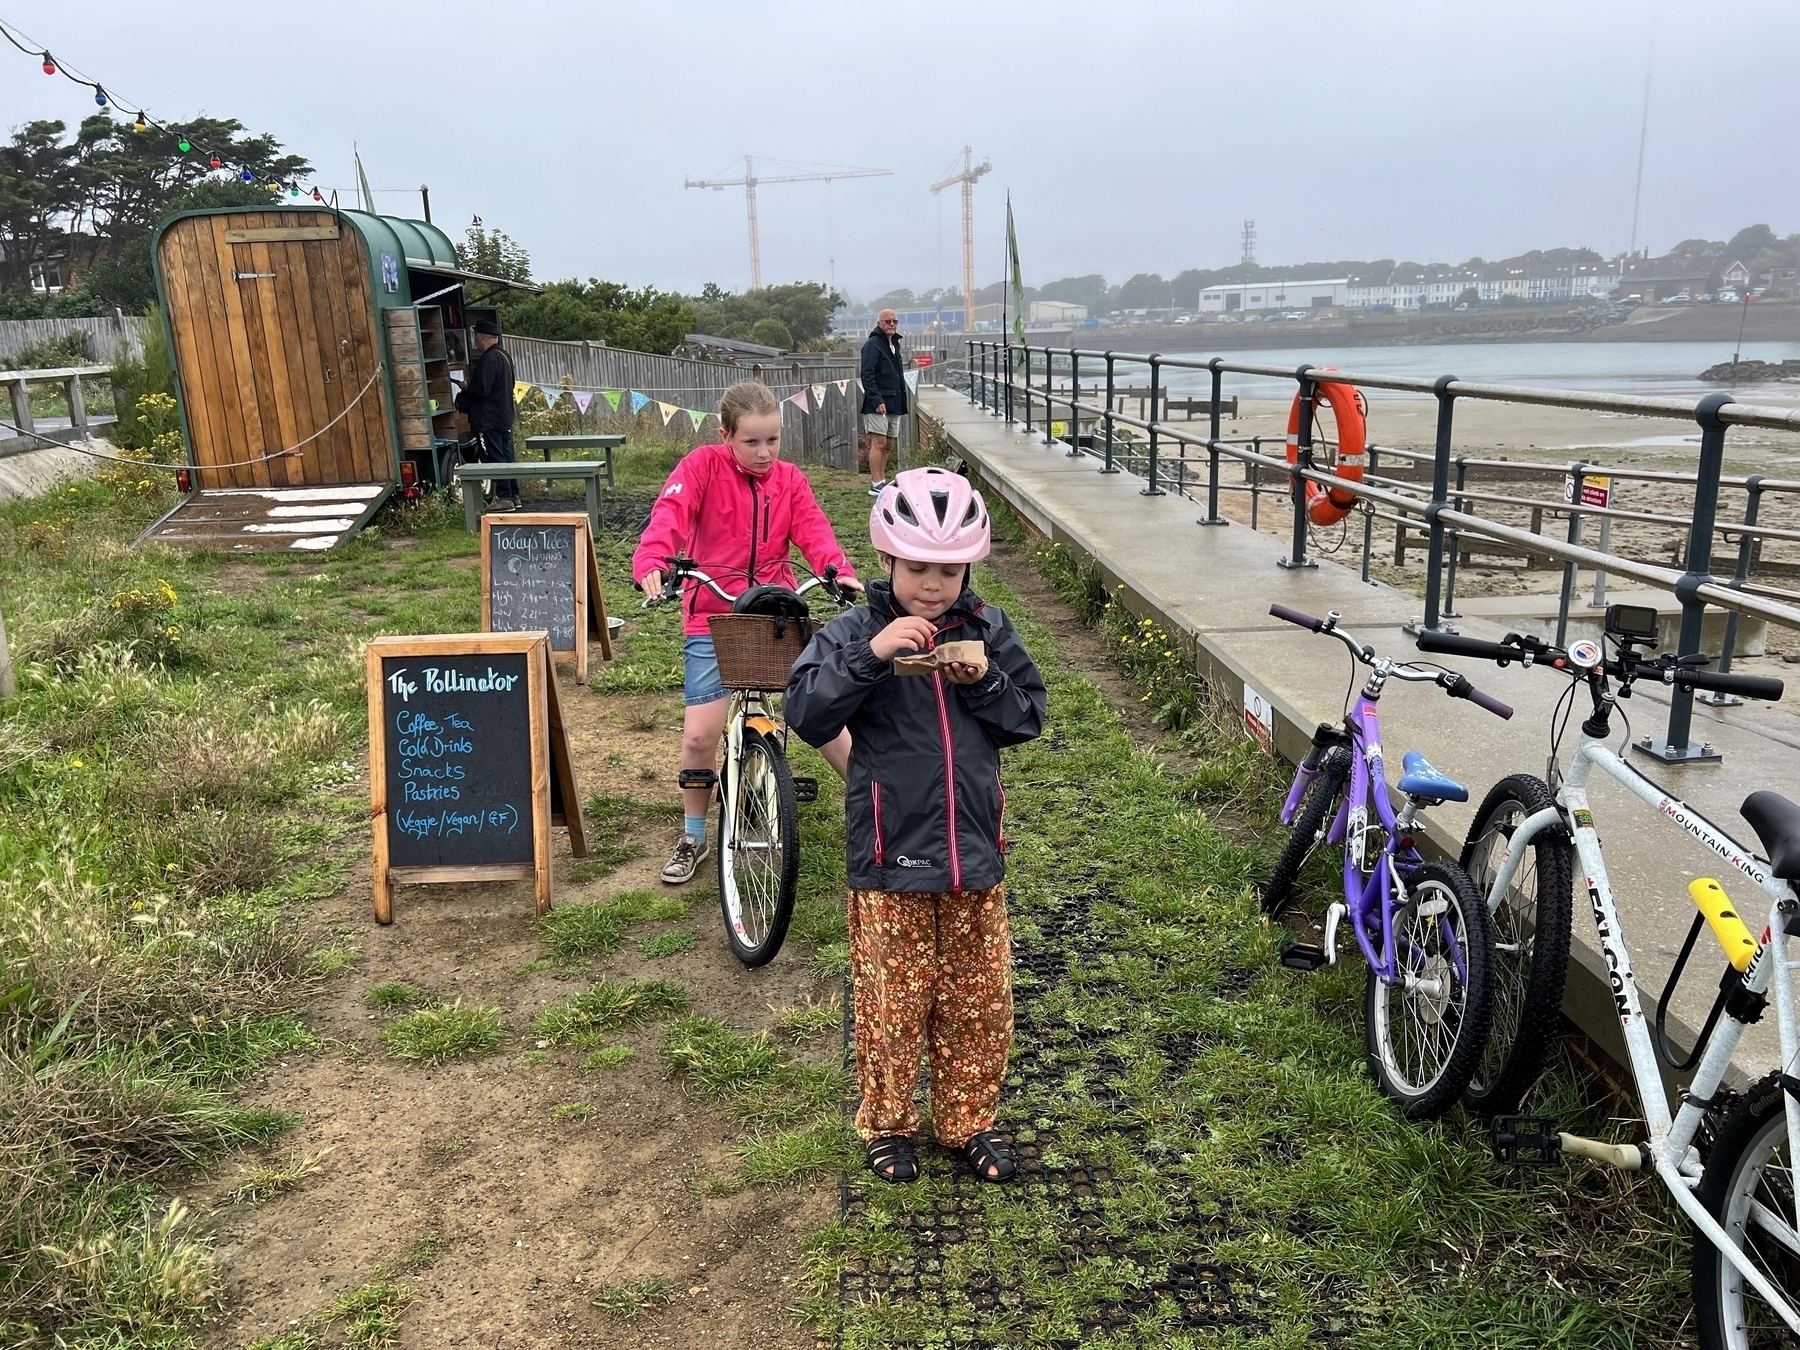 Taking a break on a bike ride at the Pollinator Cafe in Shoreham by Sea. 